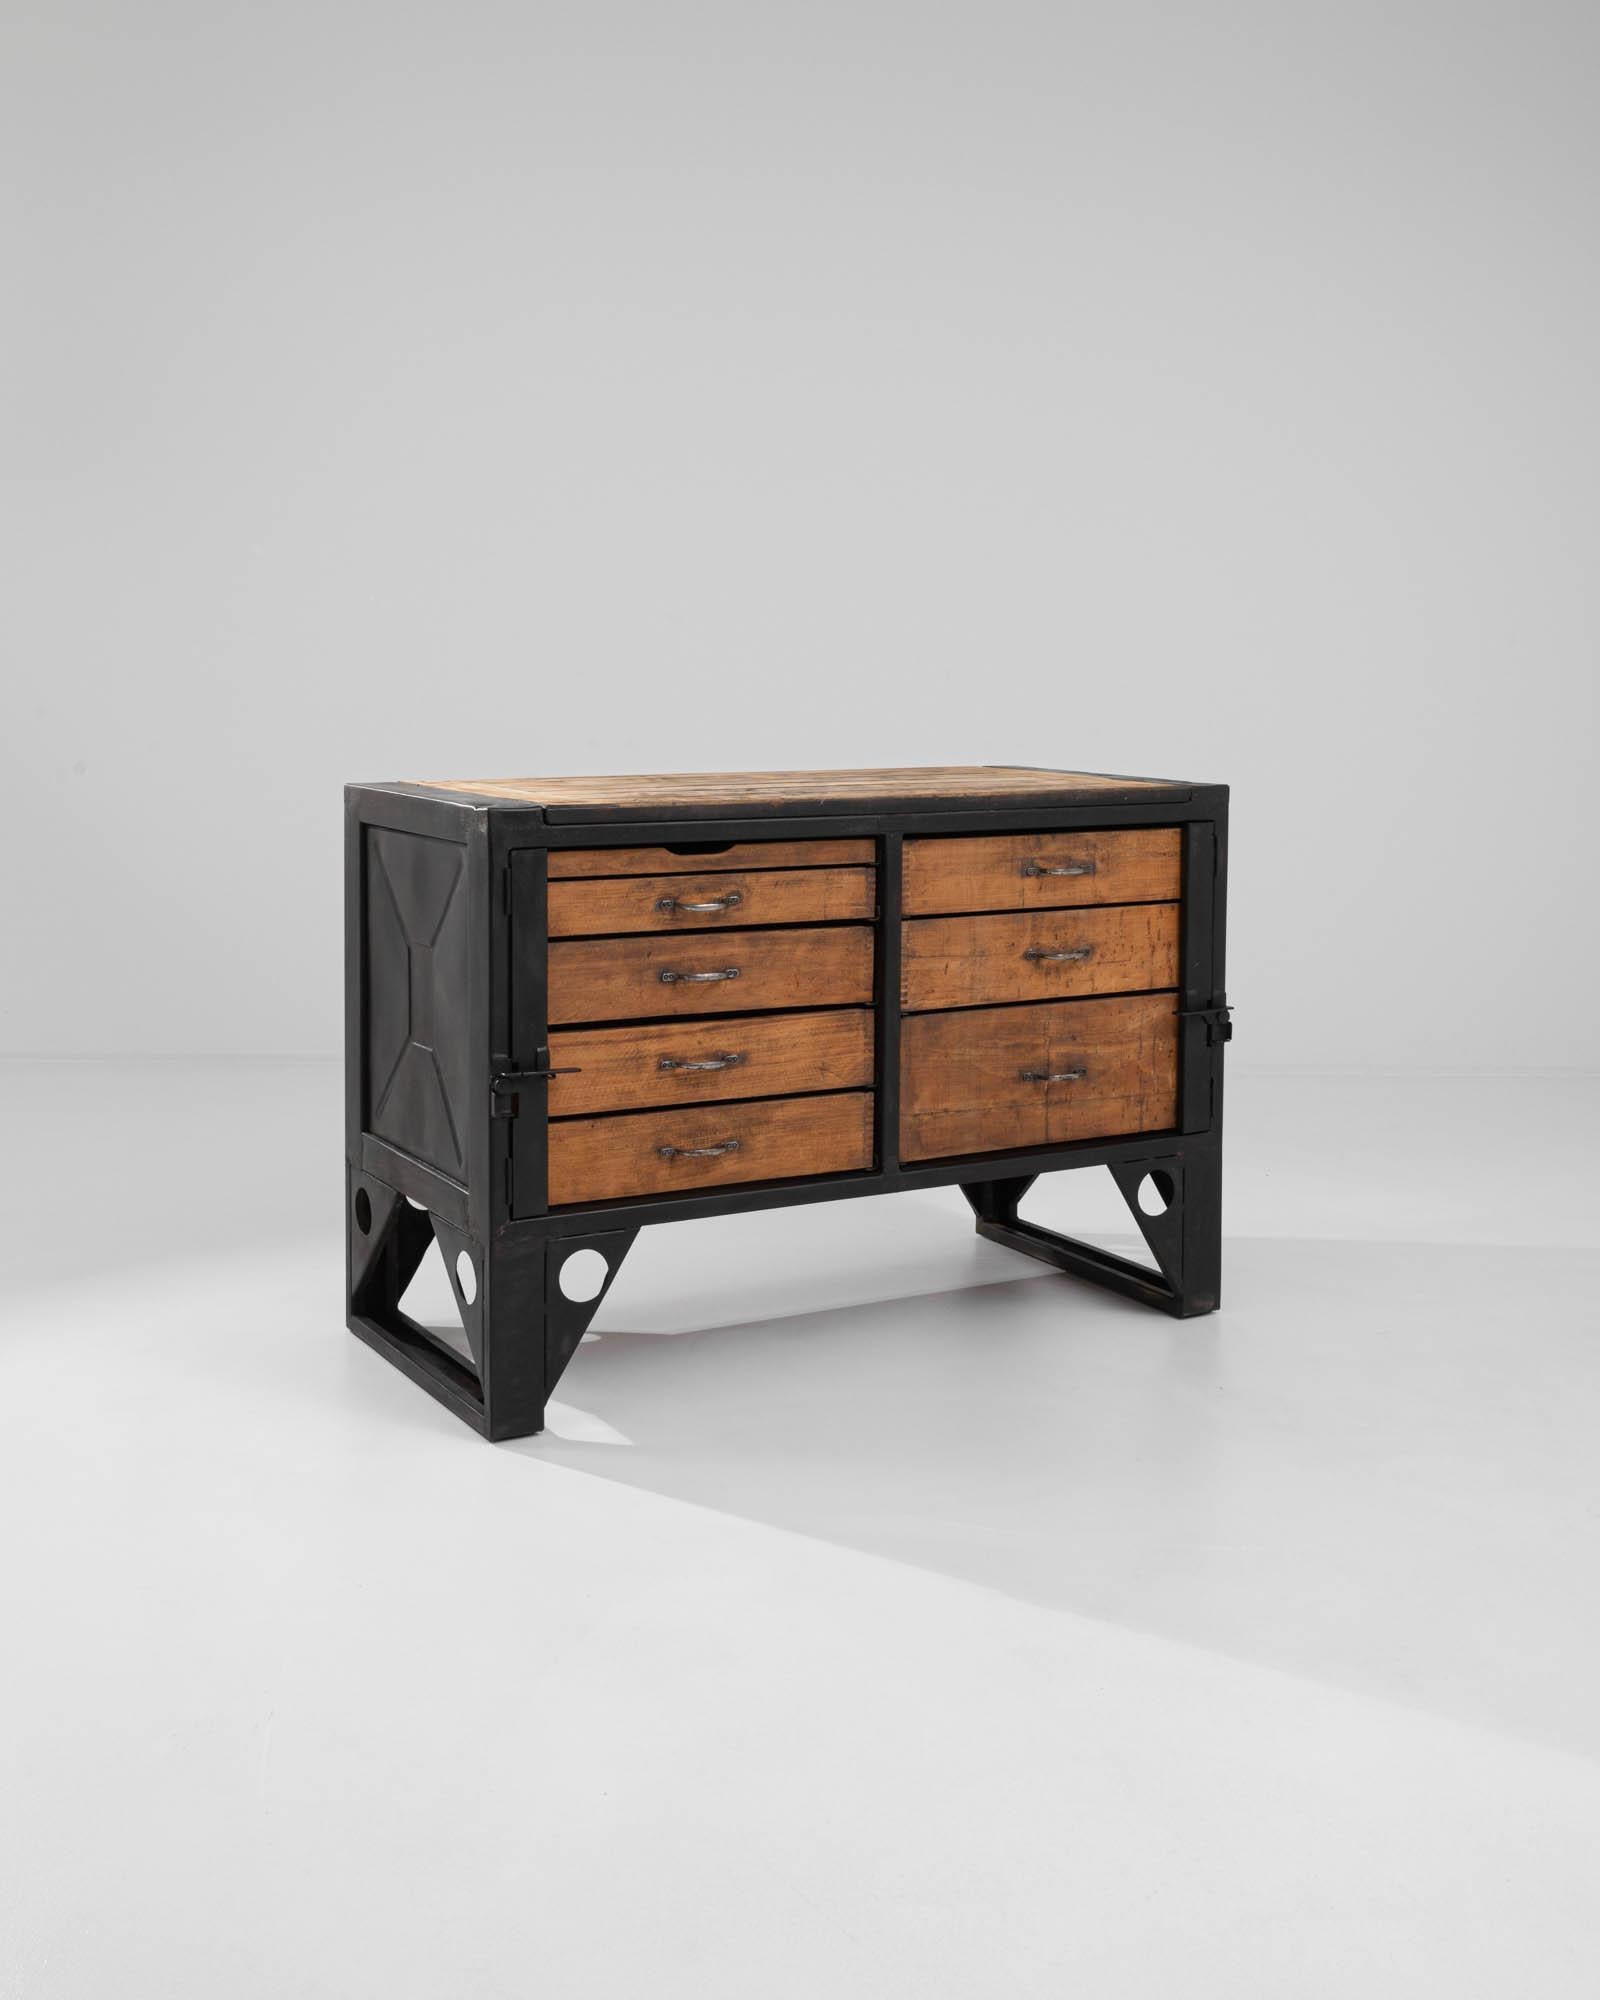 A sturdy metal base frames a bank of wooden drawer boxes. The distinctive patina made by the marks of time, reveals the history of this vintage chest. Made in Czechia in the 20th Century, this industrious set of drawers radiates a charming and tidy